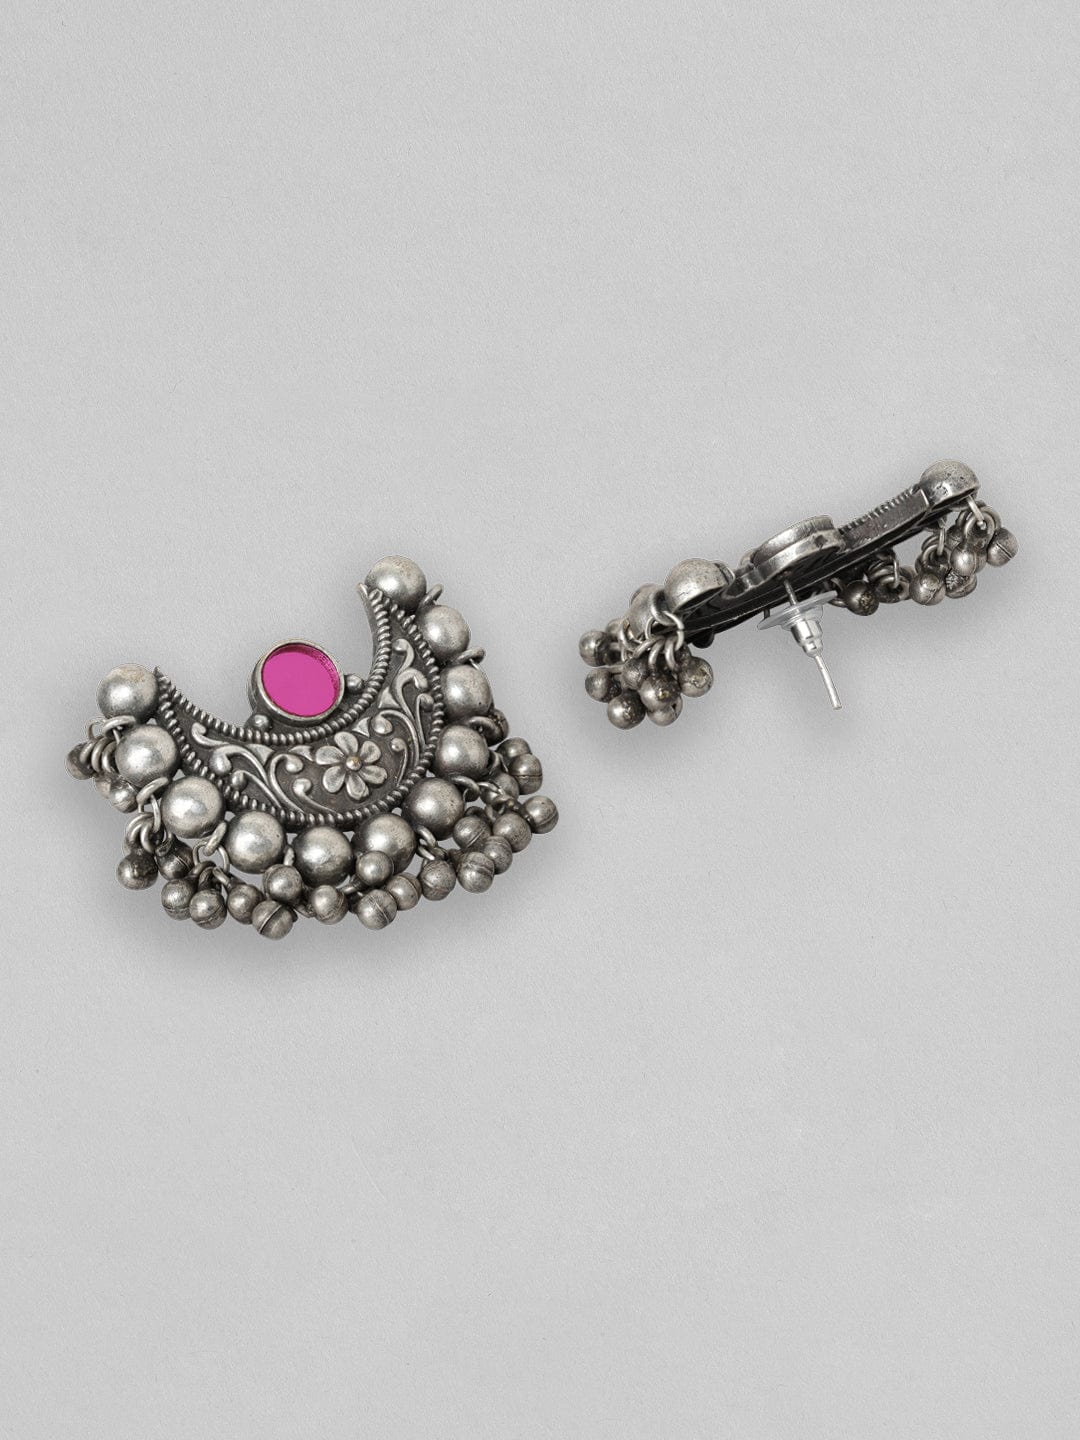 Rubans Silver Oxidised Earrings With Pink Stone And Silver Beads Earrings